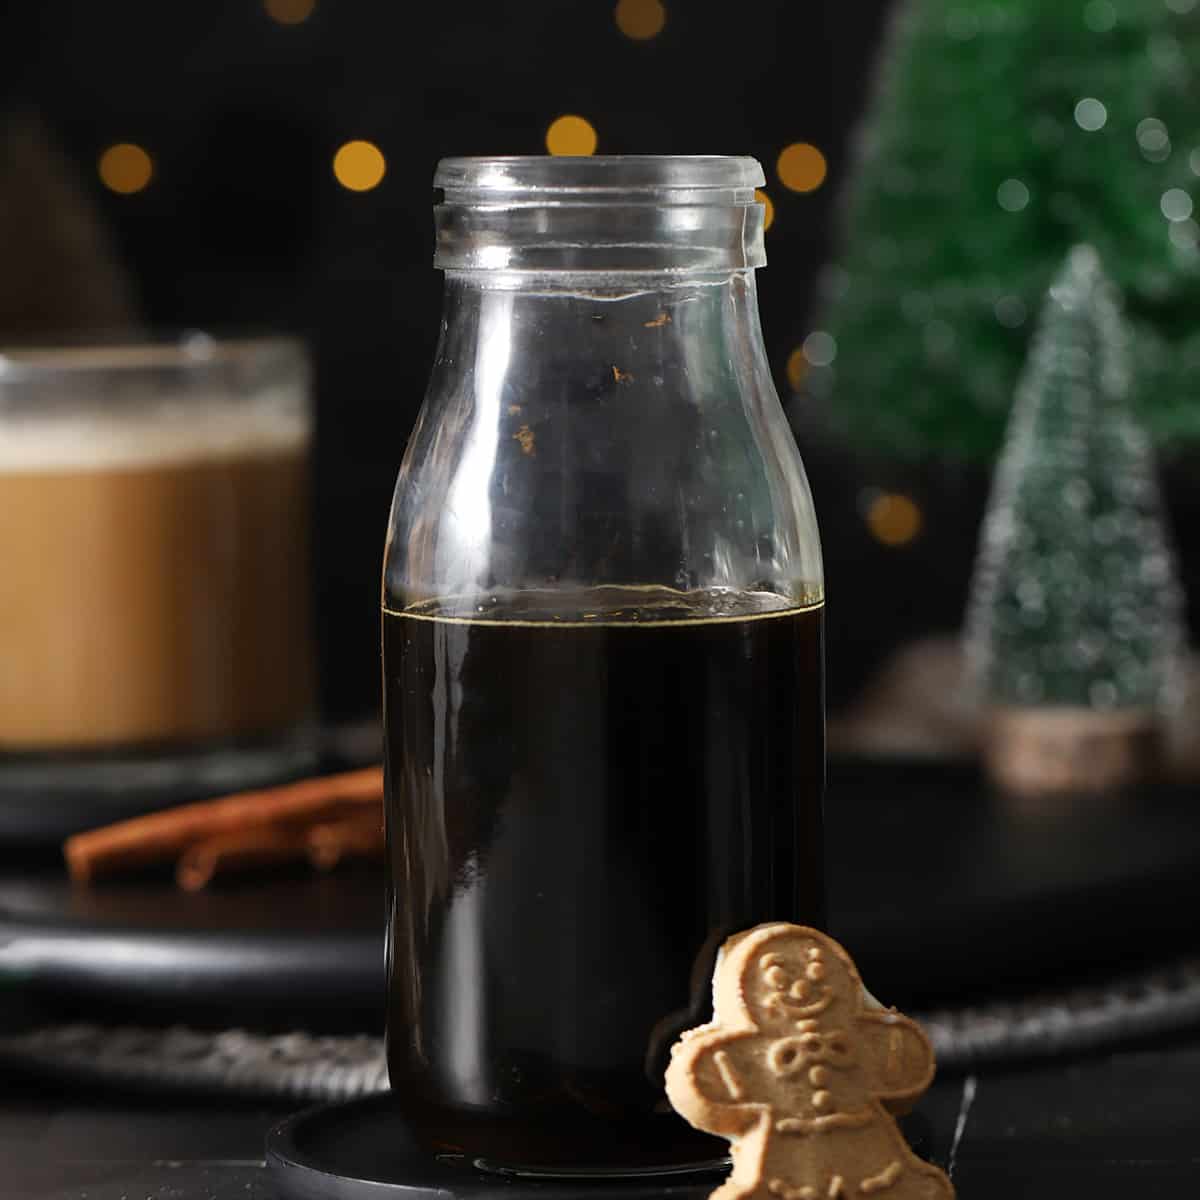 A bottle of gingerbread syrup.